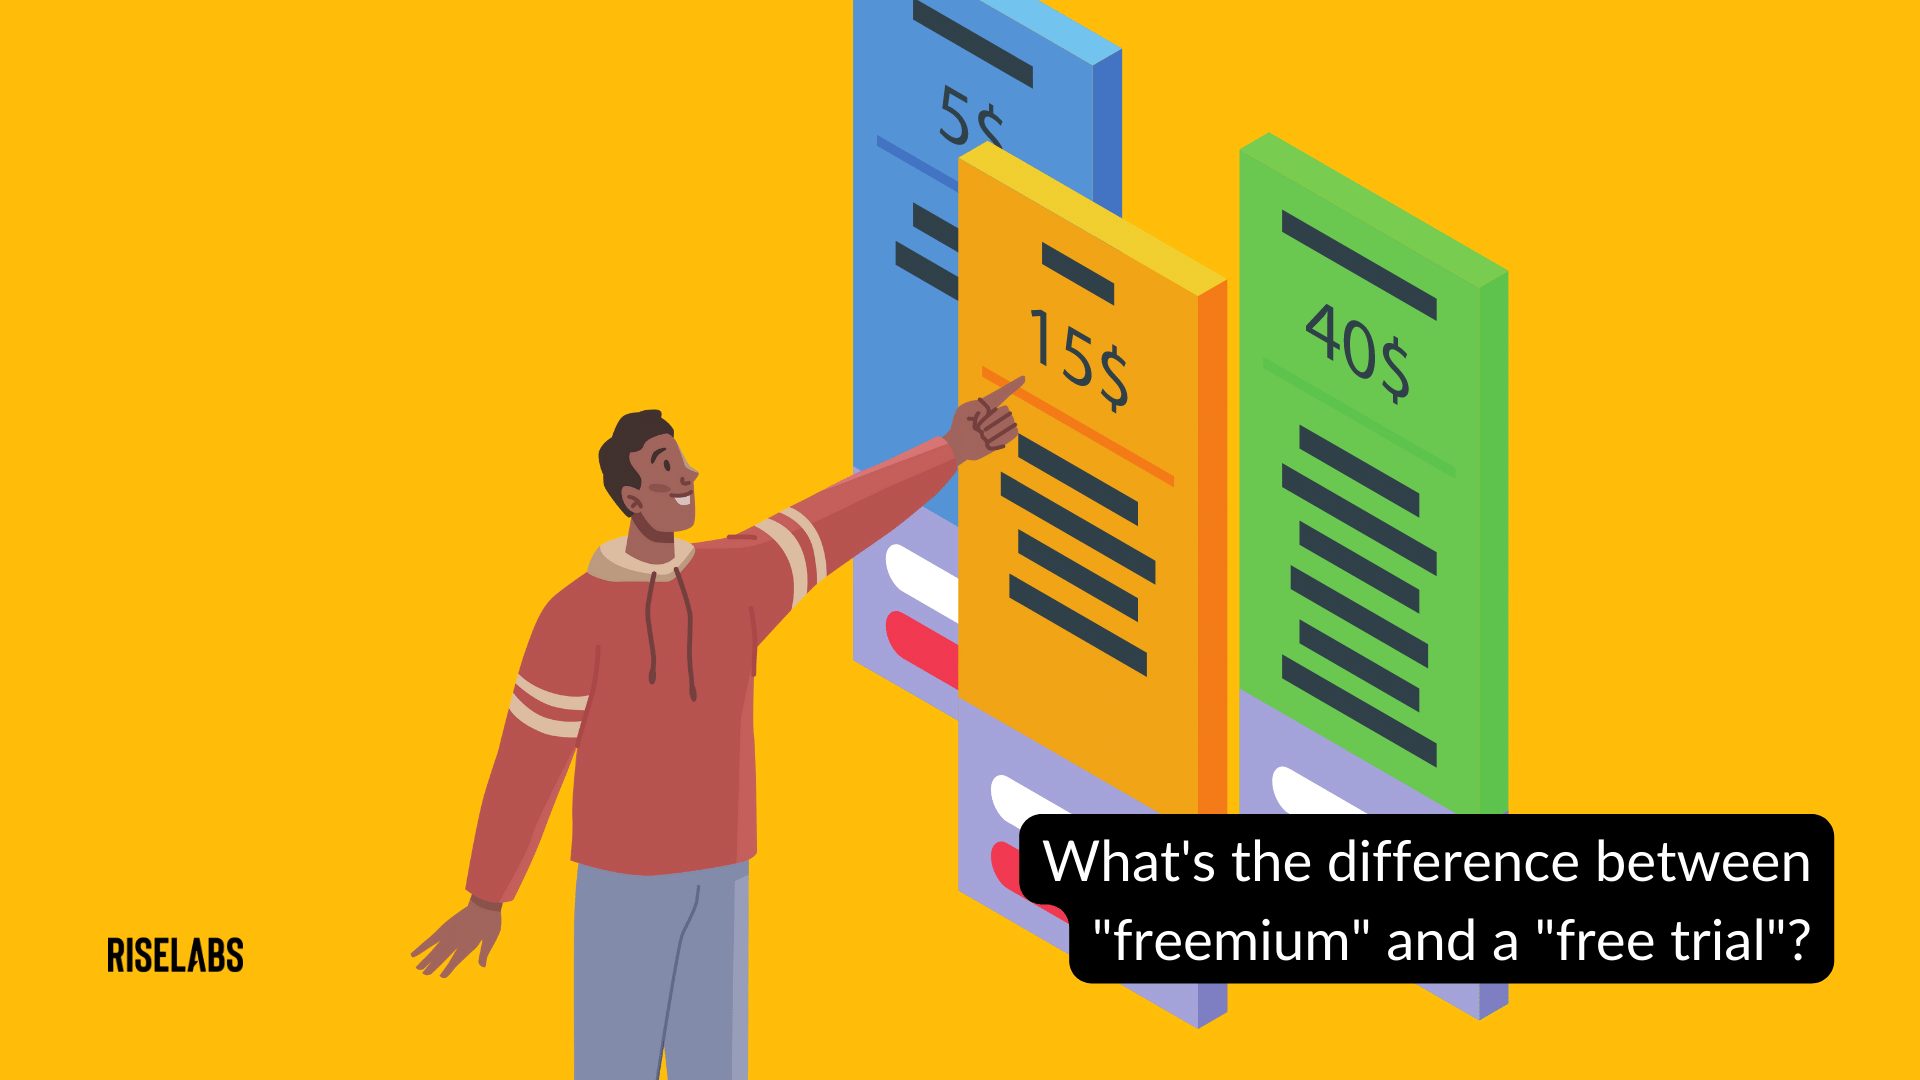 What's the difference between "freemium" and a "free trial"?